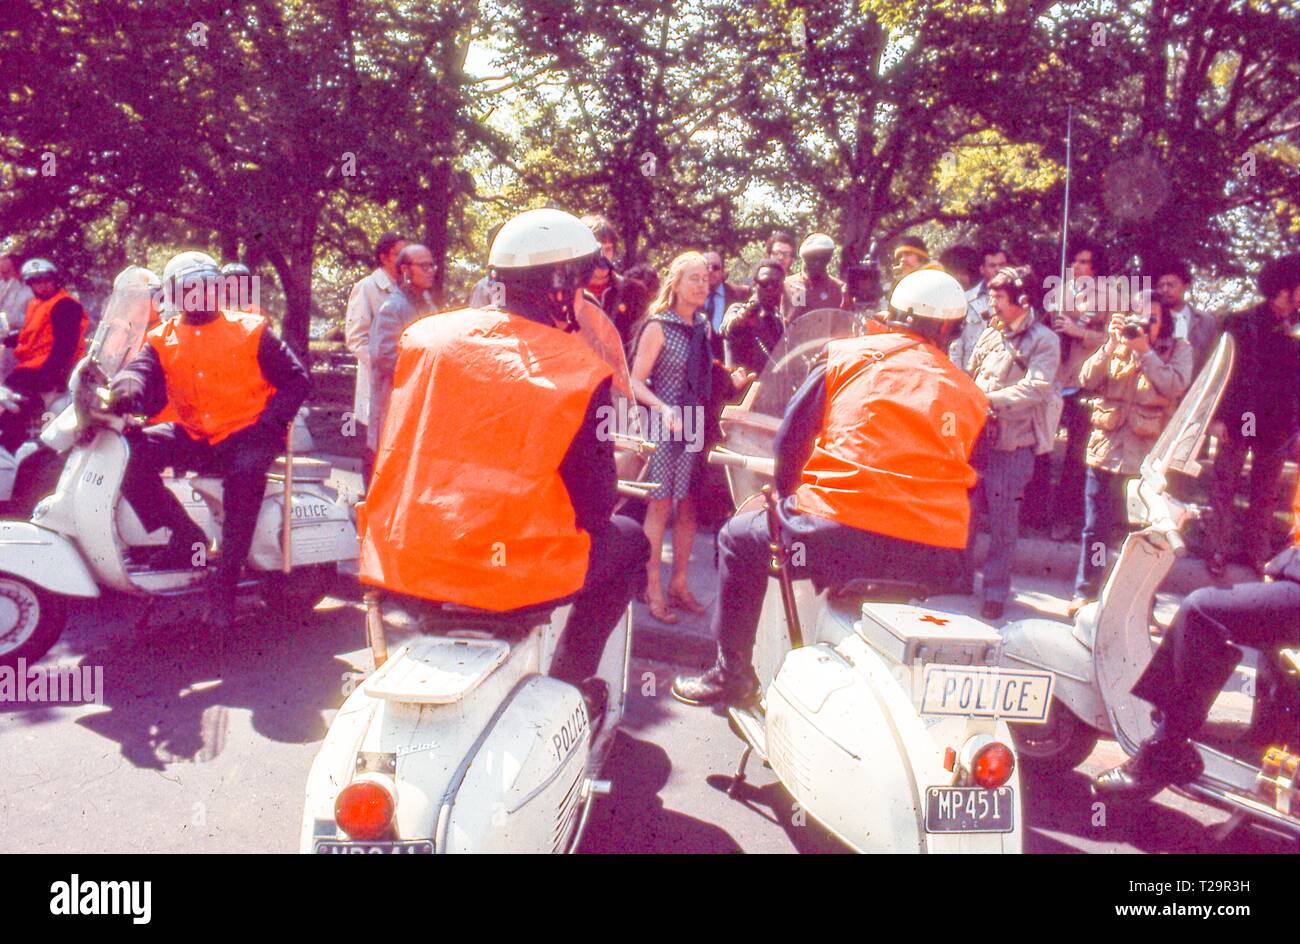 During the 1971 May Day Protests against the Vietnam War located, protesters in hippie attire face off against several motorcycle police officers, in Washington, DC, May 1971. () Stock Photo